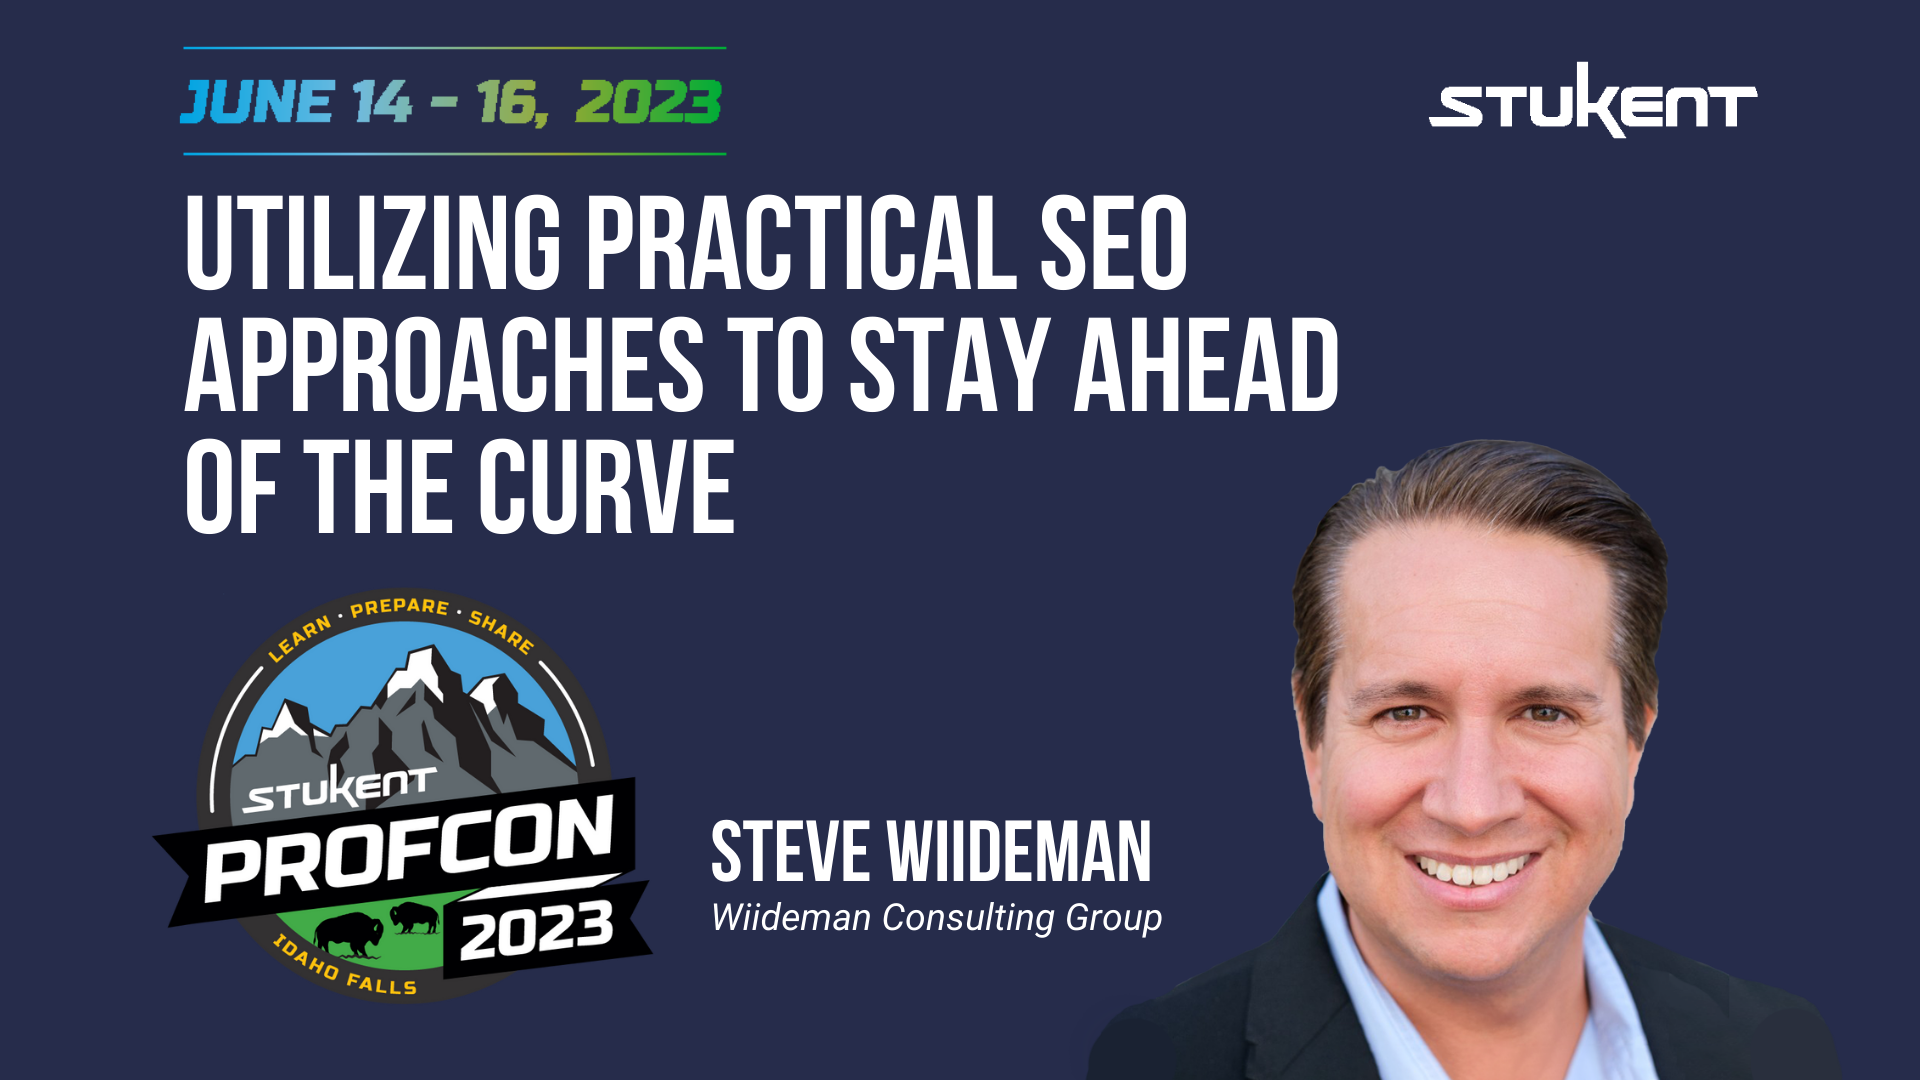 Utilizing Practical SEO Approaches to Stay Ahead of the Curve